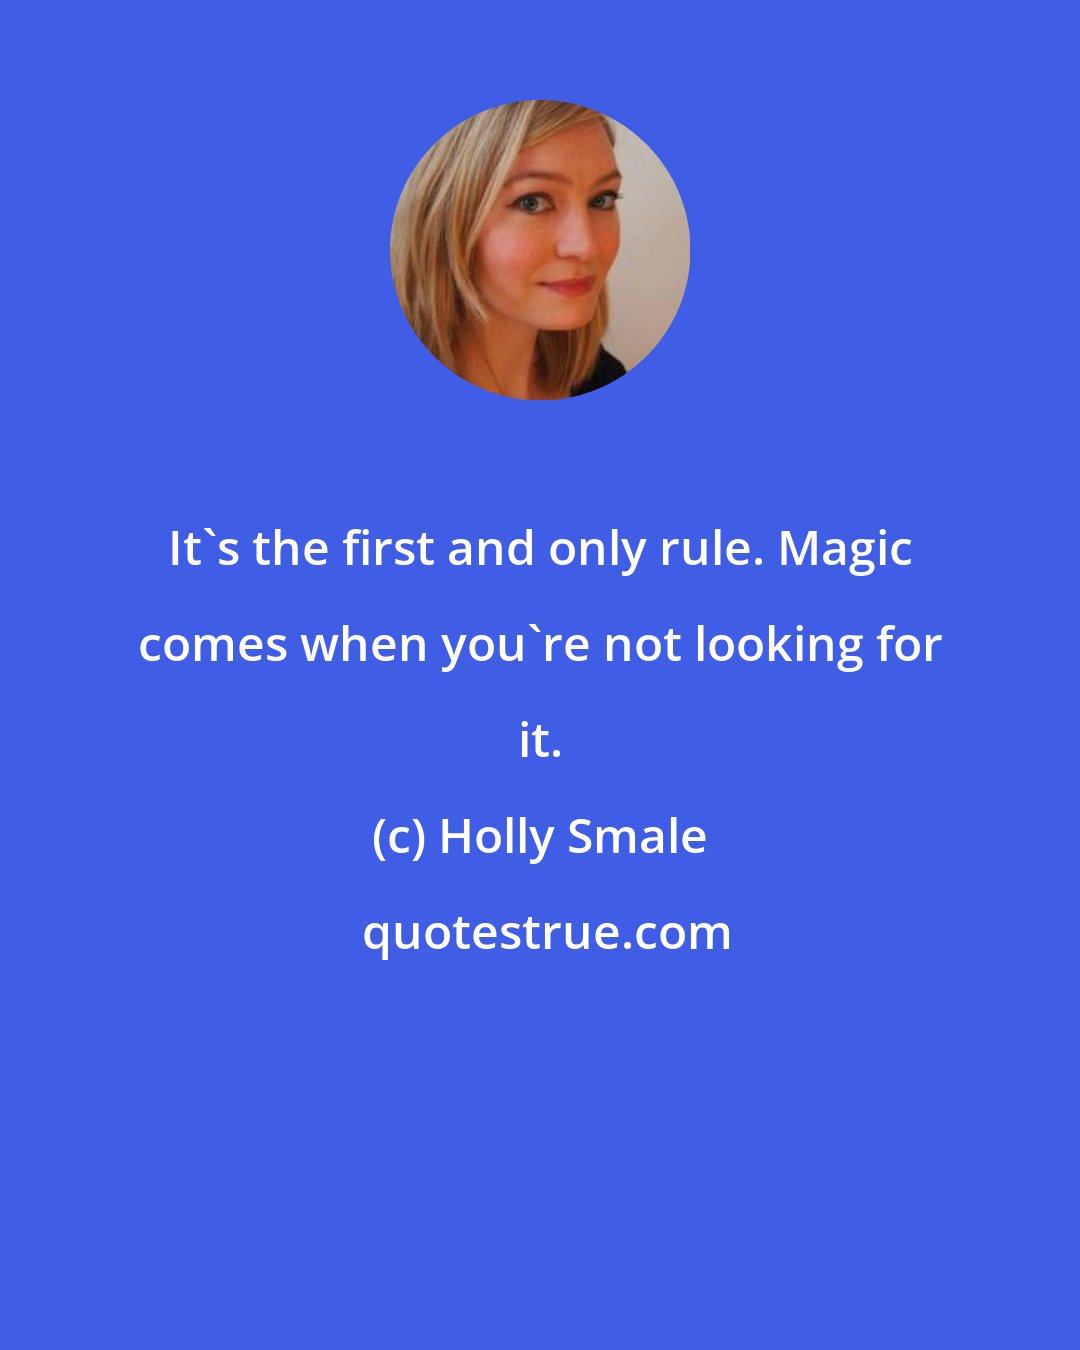 Holly Smale: It's the first and only rule. Magic comes when you're not looking for it.